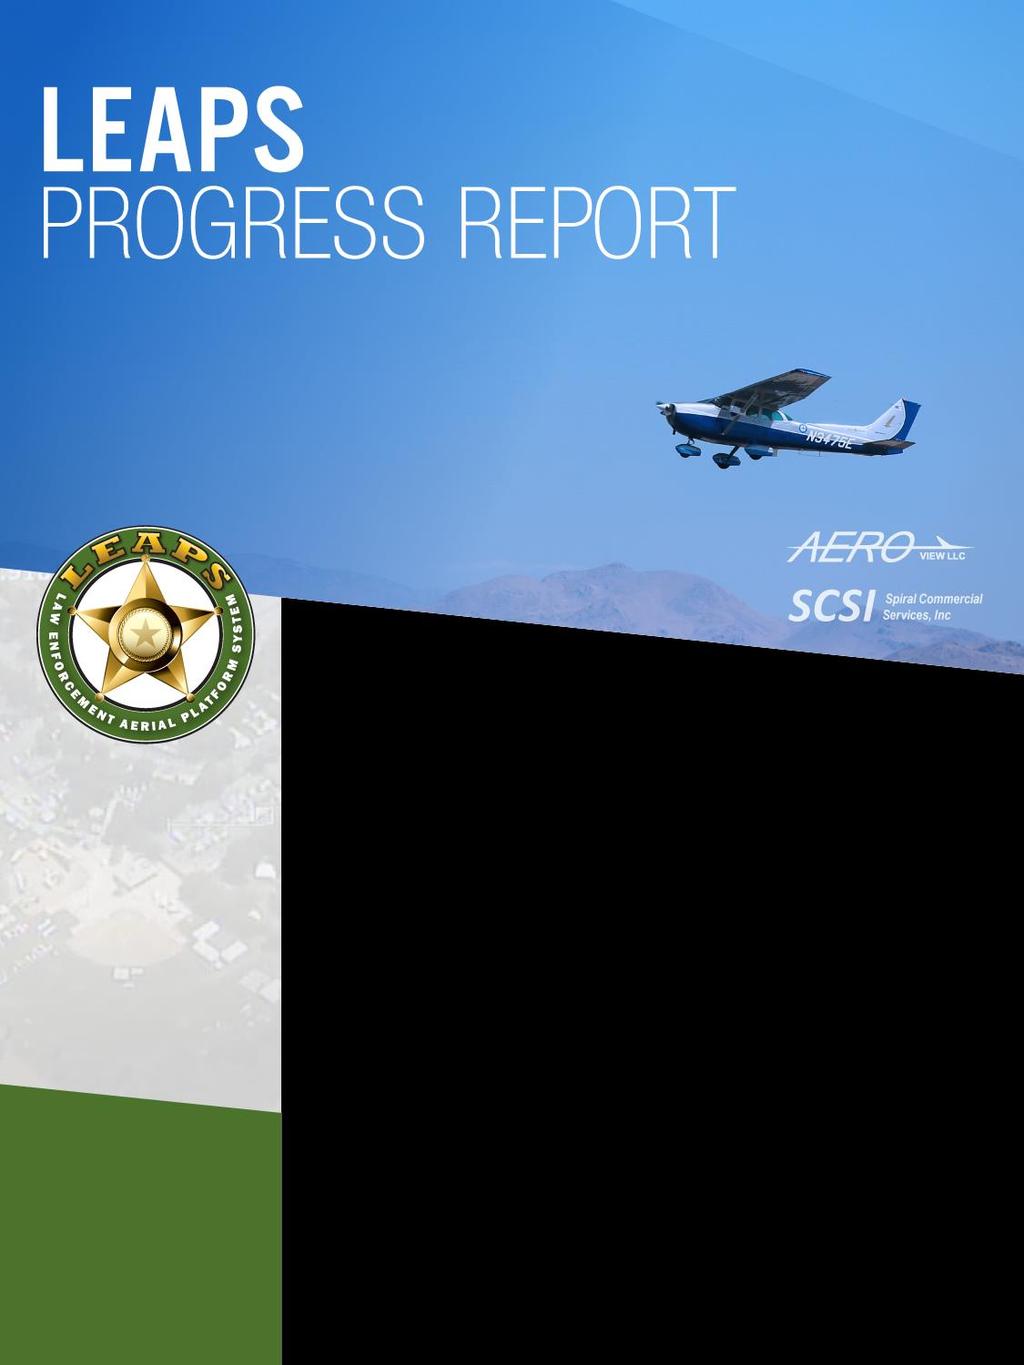 June 2018 Vol 4-6 LAW ENFORCEMENT AERIAL PLATFORM SYSTEM (LEAPS) PROVIDES AERIAL OBSERVATION SURVEILLANCE FOR THE CITY OF LANCASTER AND THE LASD During May 2018, LASD formally logged 110 LEAPS